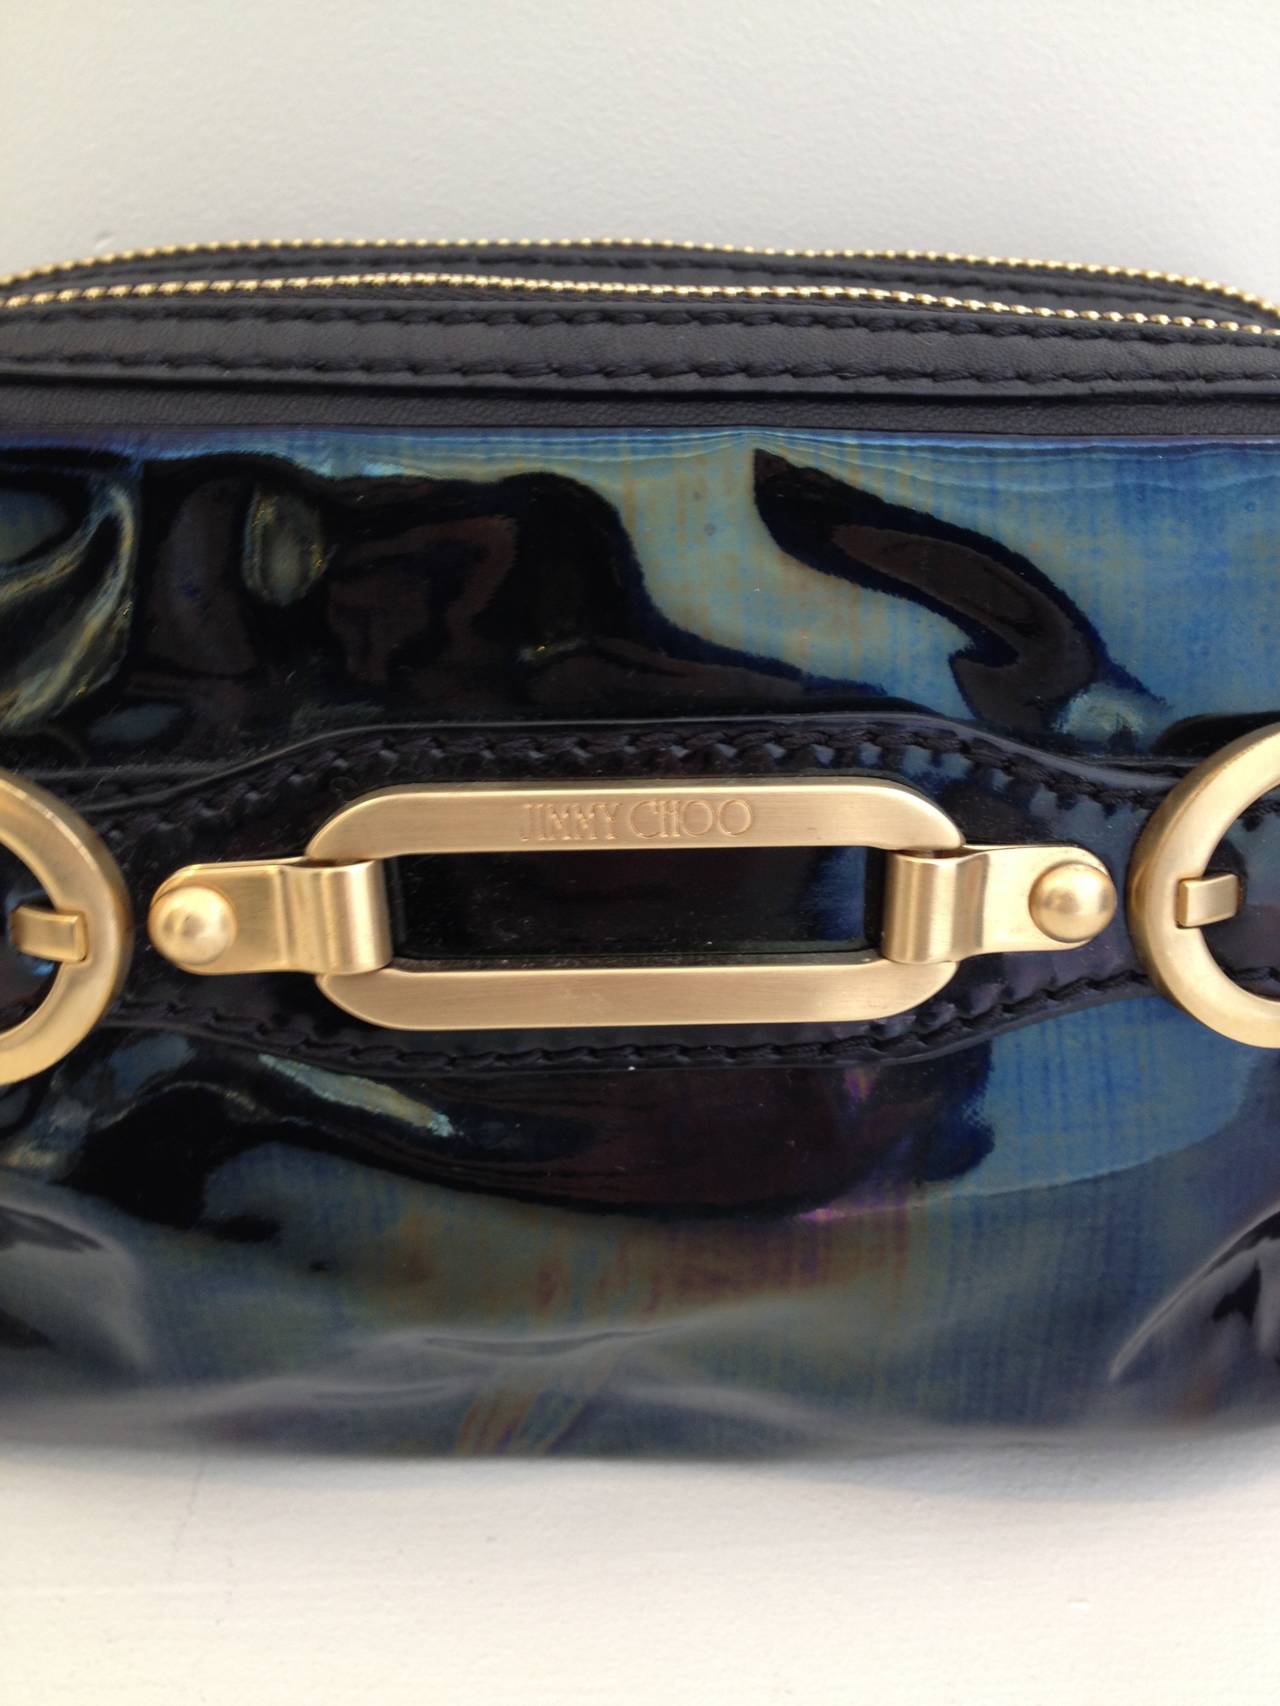 Women's Jimmy Choo Black Patent Purse with Gold Chain